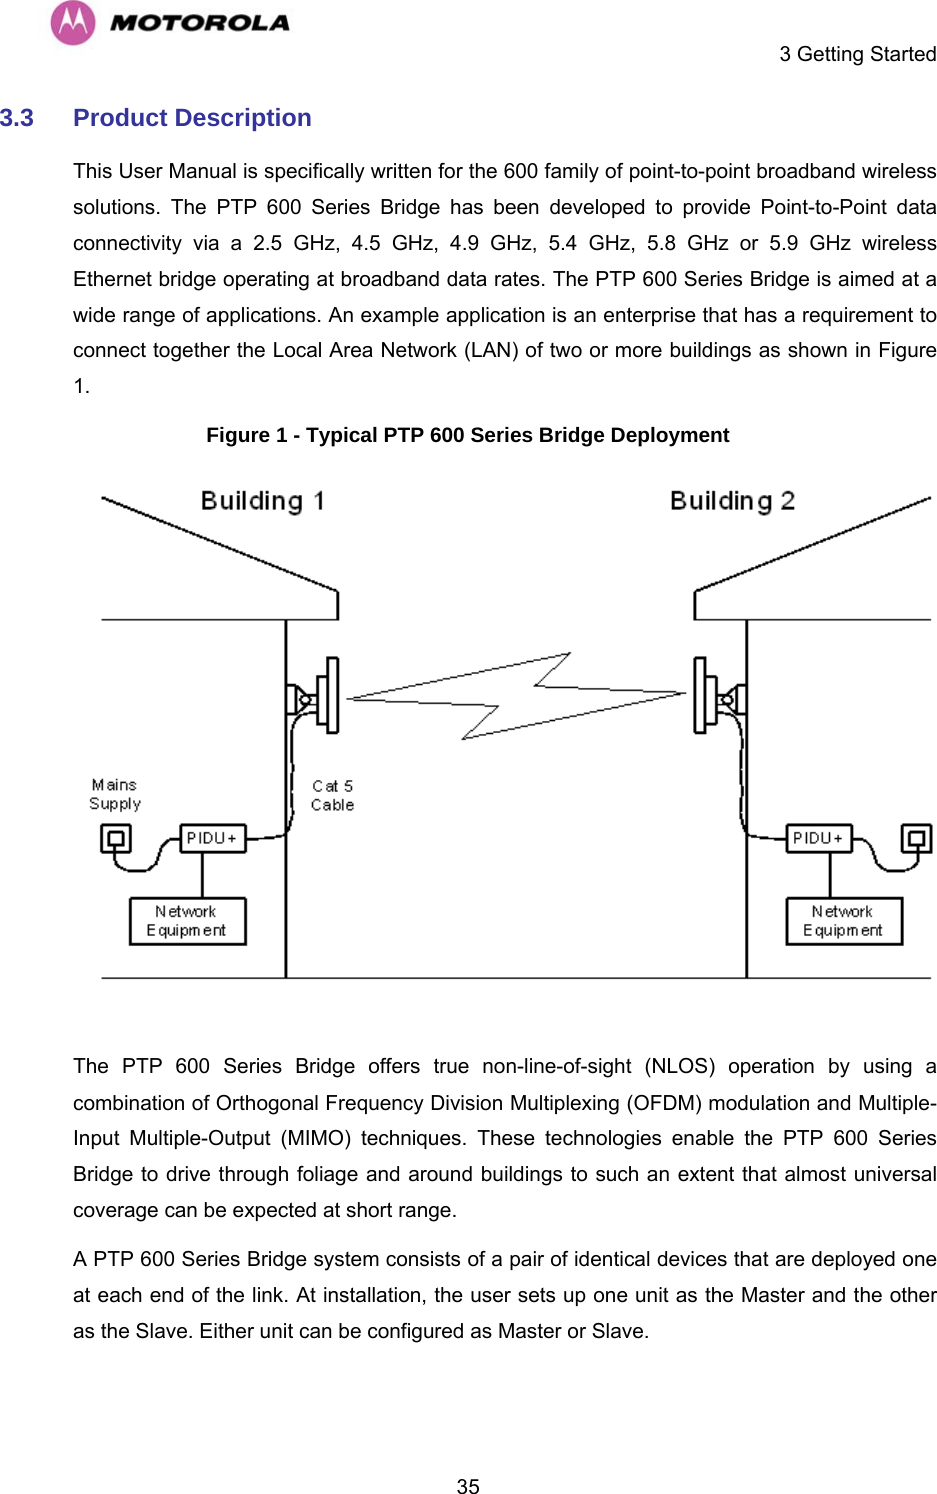     3 Getting Started  353.3  Product Description This User Manual is specifically written for the 600 family of point-to-point broadband wireless solutions. The PTP 600 Series Bridge has been developed to provide Point-to-Point data connectivity via a 2.5 GHz, 4.5 GHz, 4.9 GHz, 5.4 GHz, 5.8 GHz or 5.9 GHz wireless Ethernet bridge operating at broadband data rates. The PTP 600 Series Bridge is aimed at a wide range of applications. An example application is an enterprise that has a requirement to connect together the Local Area Network (LAN) of two or more buildings as shown in Figure 1.  Figure 1 - Typical PTP 600 Series Bridge Deployment   The PTP 600 Series Bridge offers true non-line-of-sight (NLOS) operation by using a combination of Orthogonal Frequency Division Multiplexing (OFDM) modulation and Multiple-Input Multiple-Output (MIMO) techniques. These technologies enable the PTP 600 Series Bridge to drive through foliage and around buildings to such an extent that almost universal coverage can be expected at short range.  A PTP 600 Series Bridge system consists of a pair of identical devices that are deployed one at each end of the link. At installation, the user sets up one unit as the Master and the other as the Slave. Either unit can be configured as Master or Slave.  